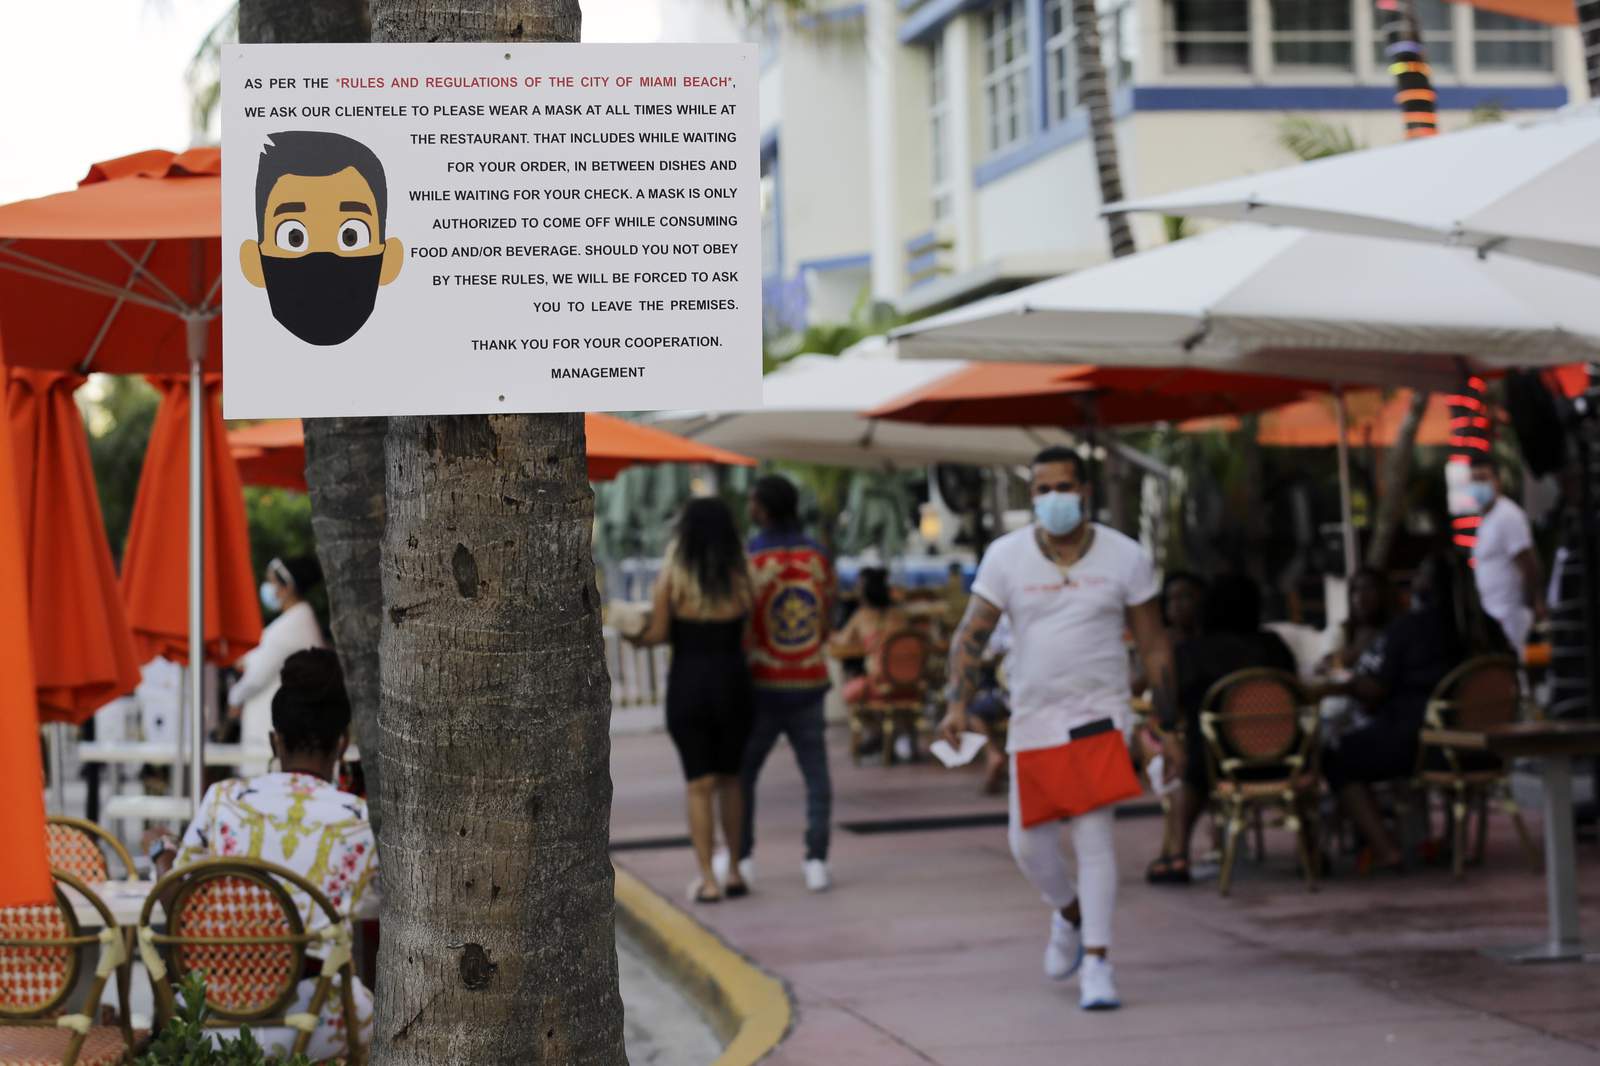 Miami Beach has issued $14,400 in fines to mask violators